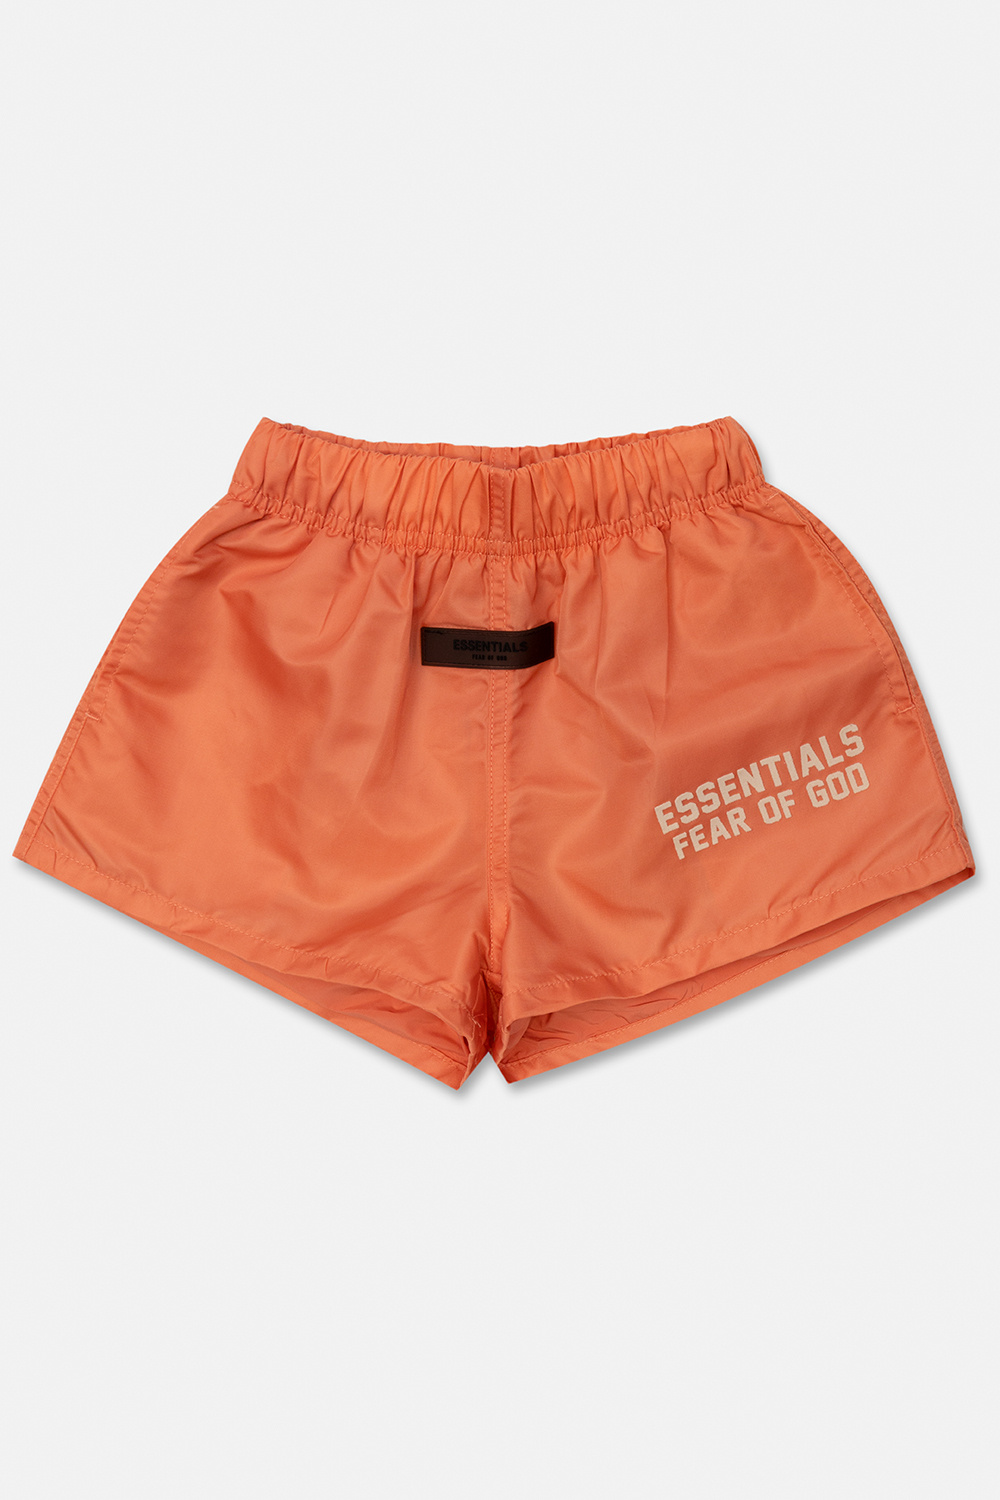 Fear Of God Essentials Kids shorts Waisted with logo